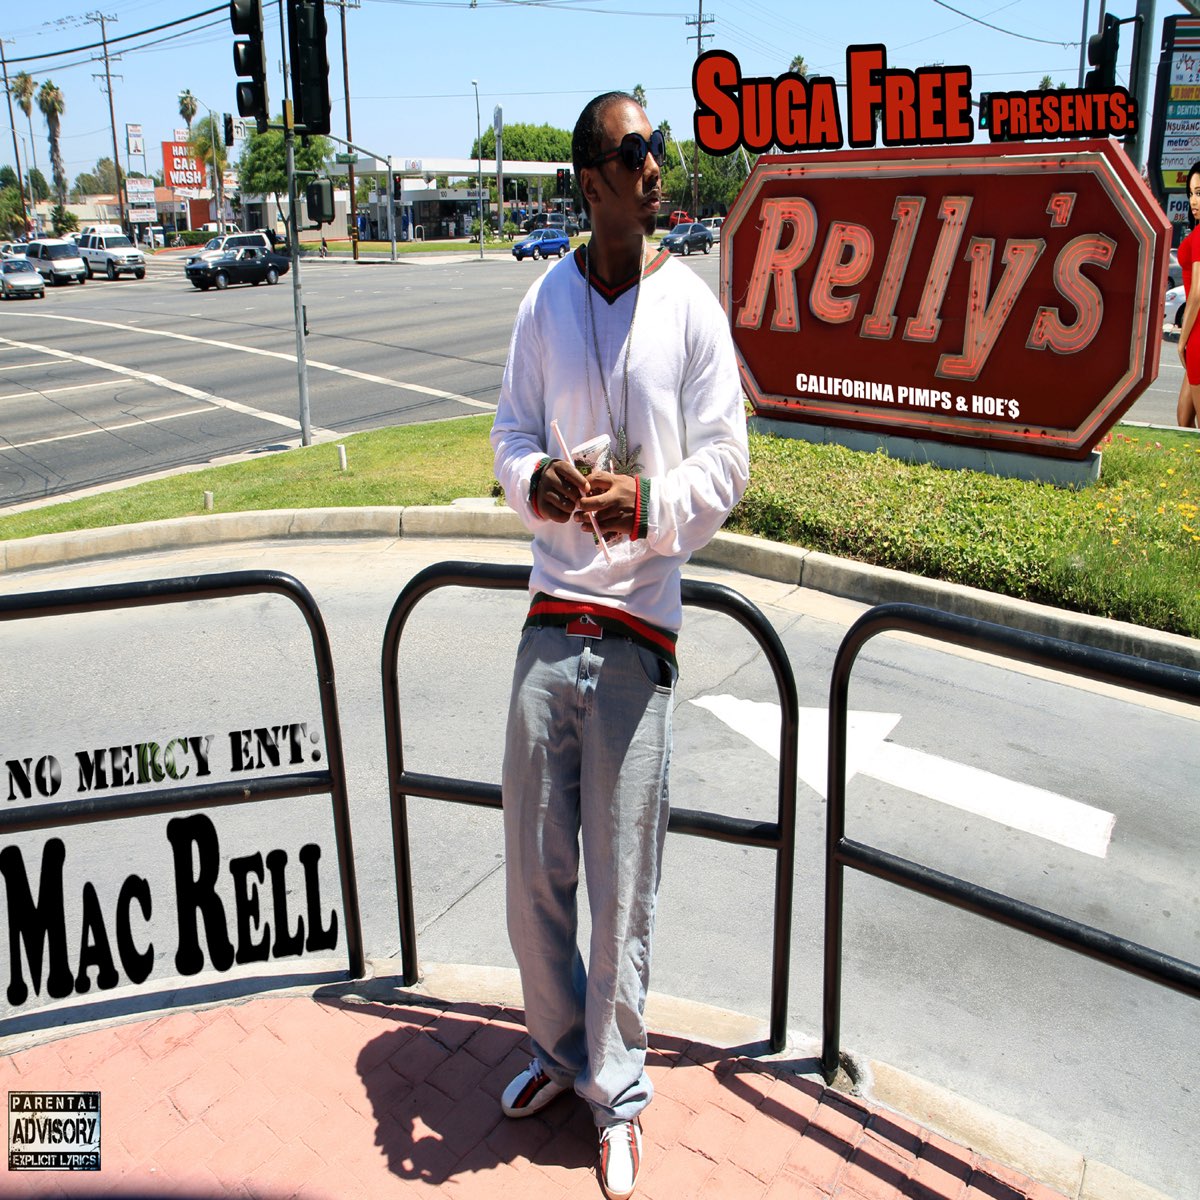 Mac Rell - Suga Free Presents: Relly's